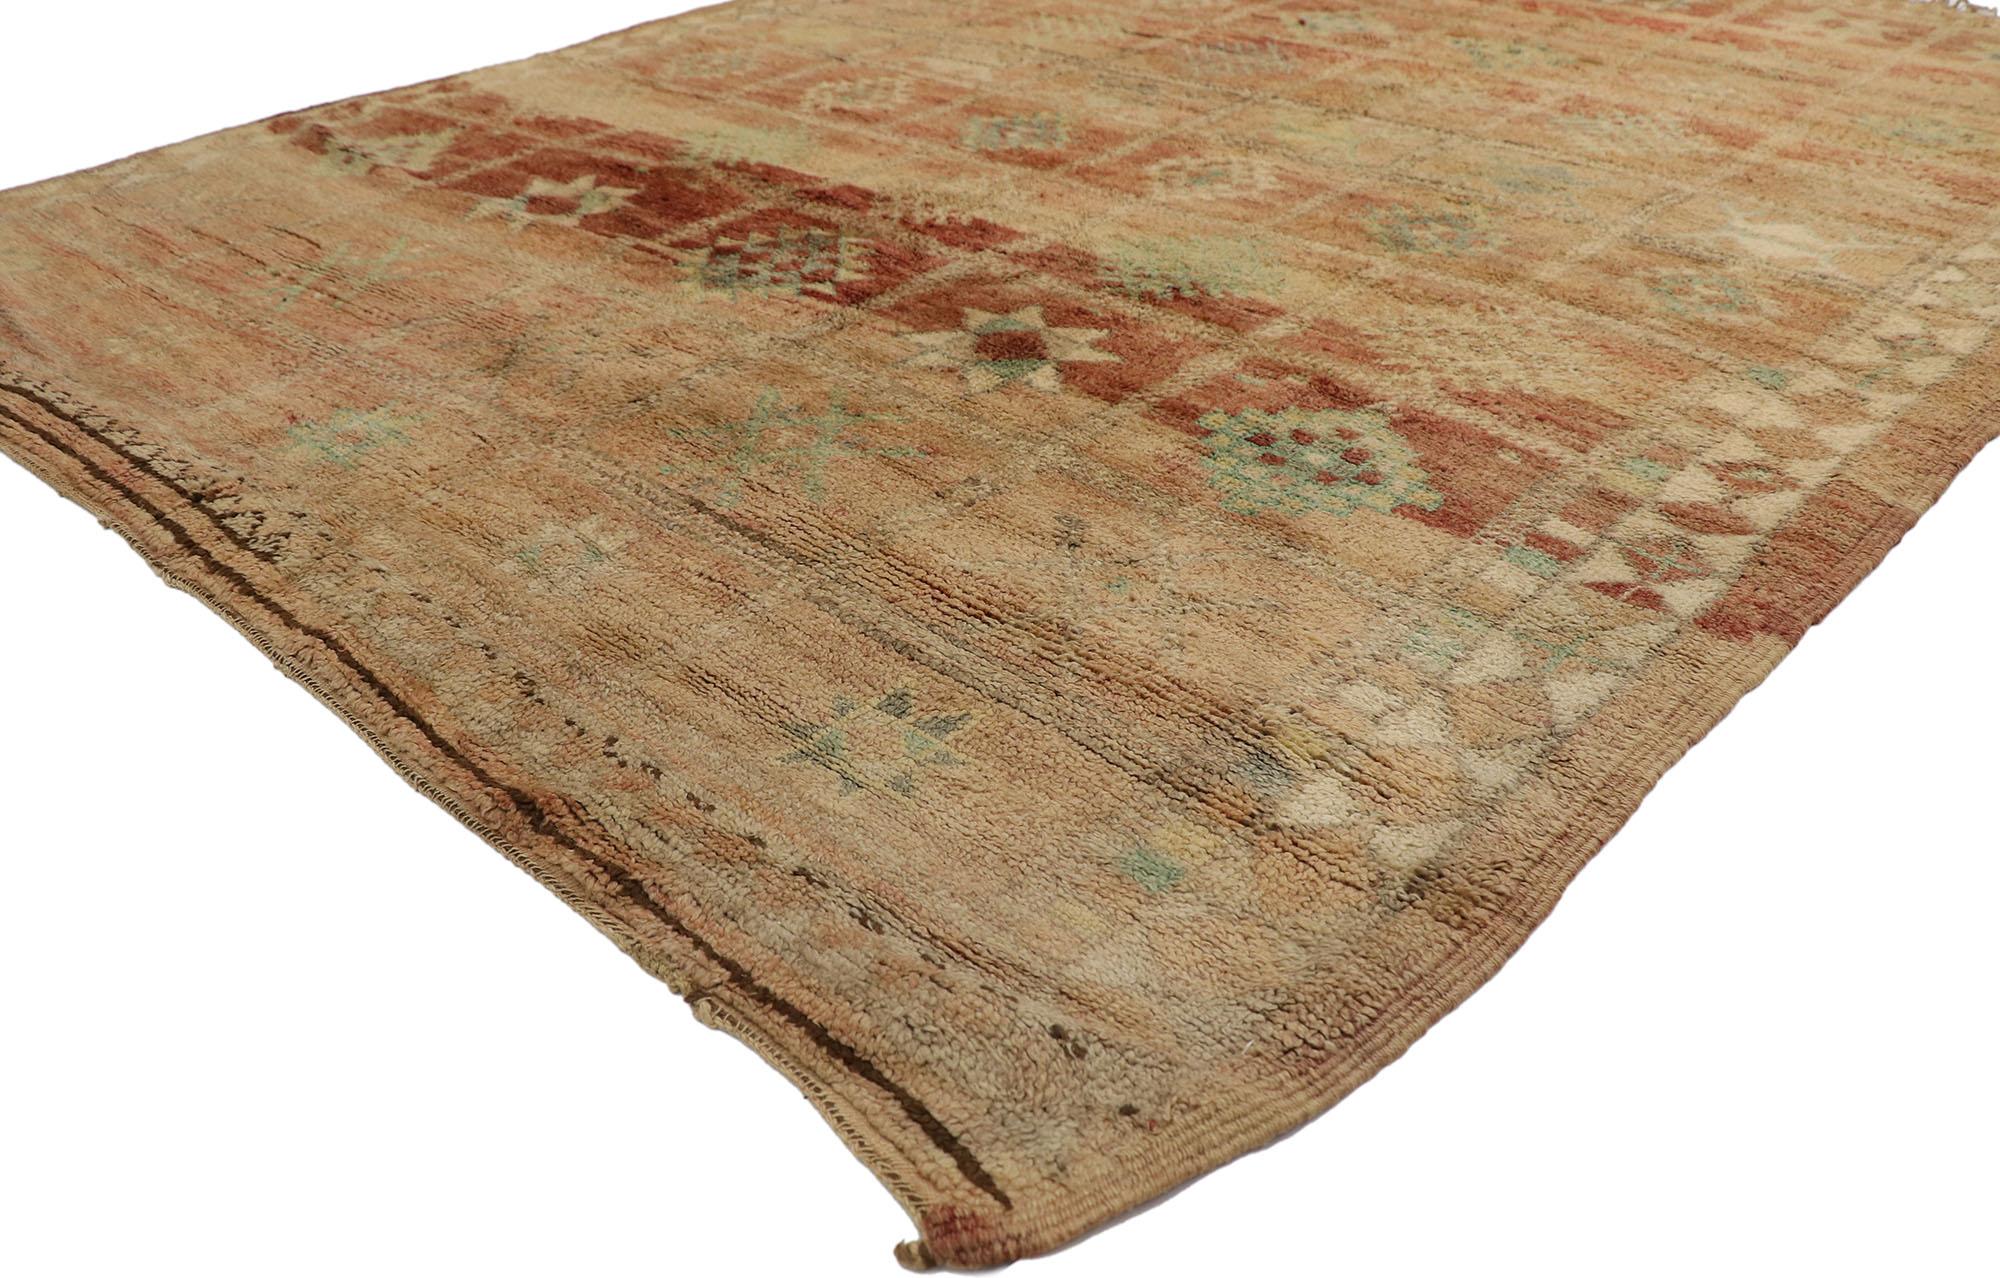 21442 Vintage Beni MGuild Moroccan Rug, 06'06 x 08'07.
Spicy global style meets organic modern in this hand knotted wool vintage Beni MGuild Moroccan rug. The esoteric symbolism and nature-inspired colors woven into this piece work together creating